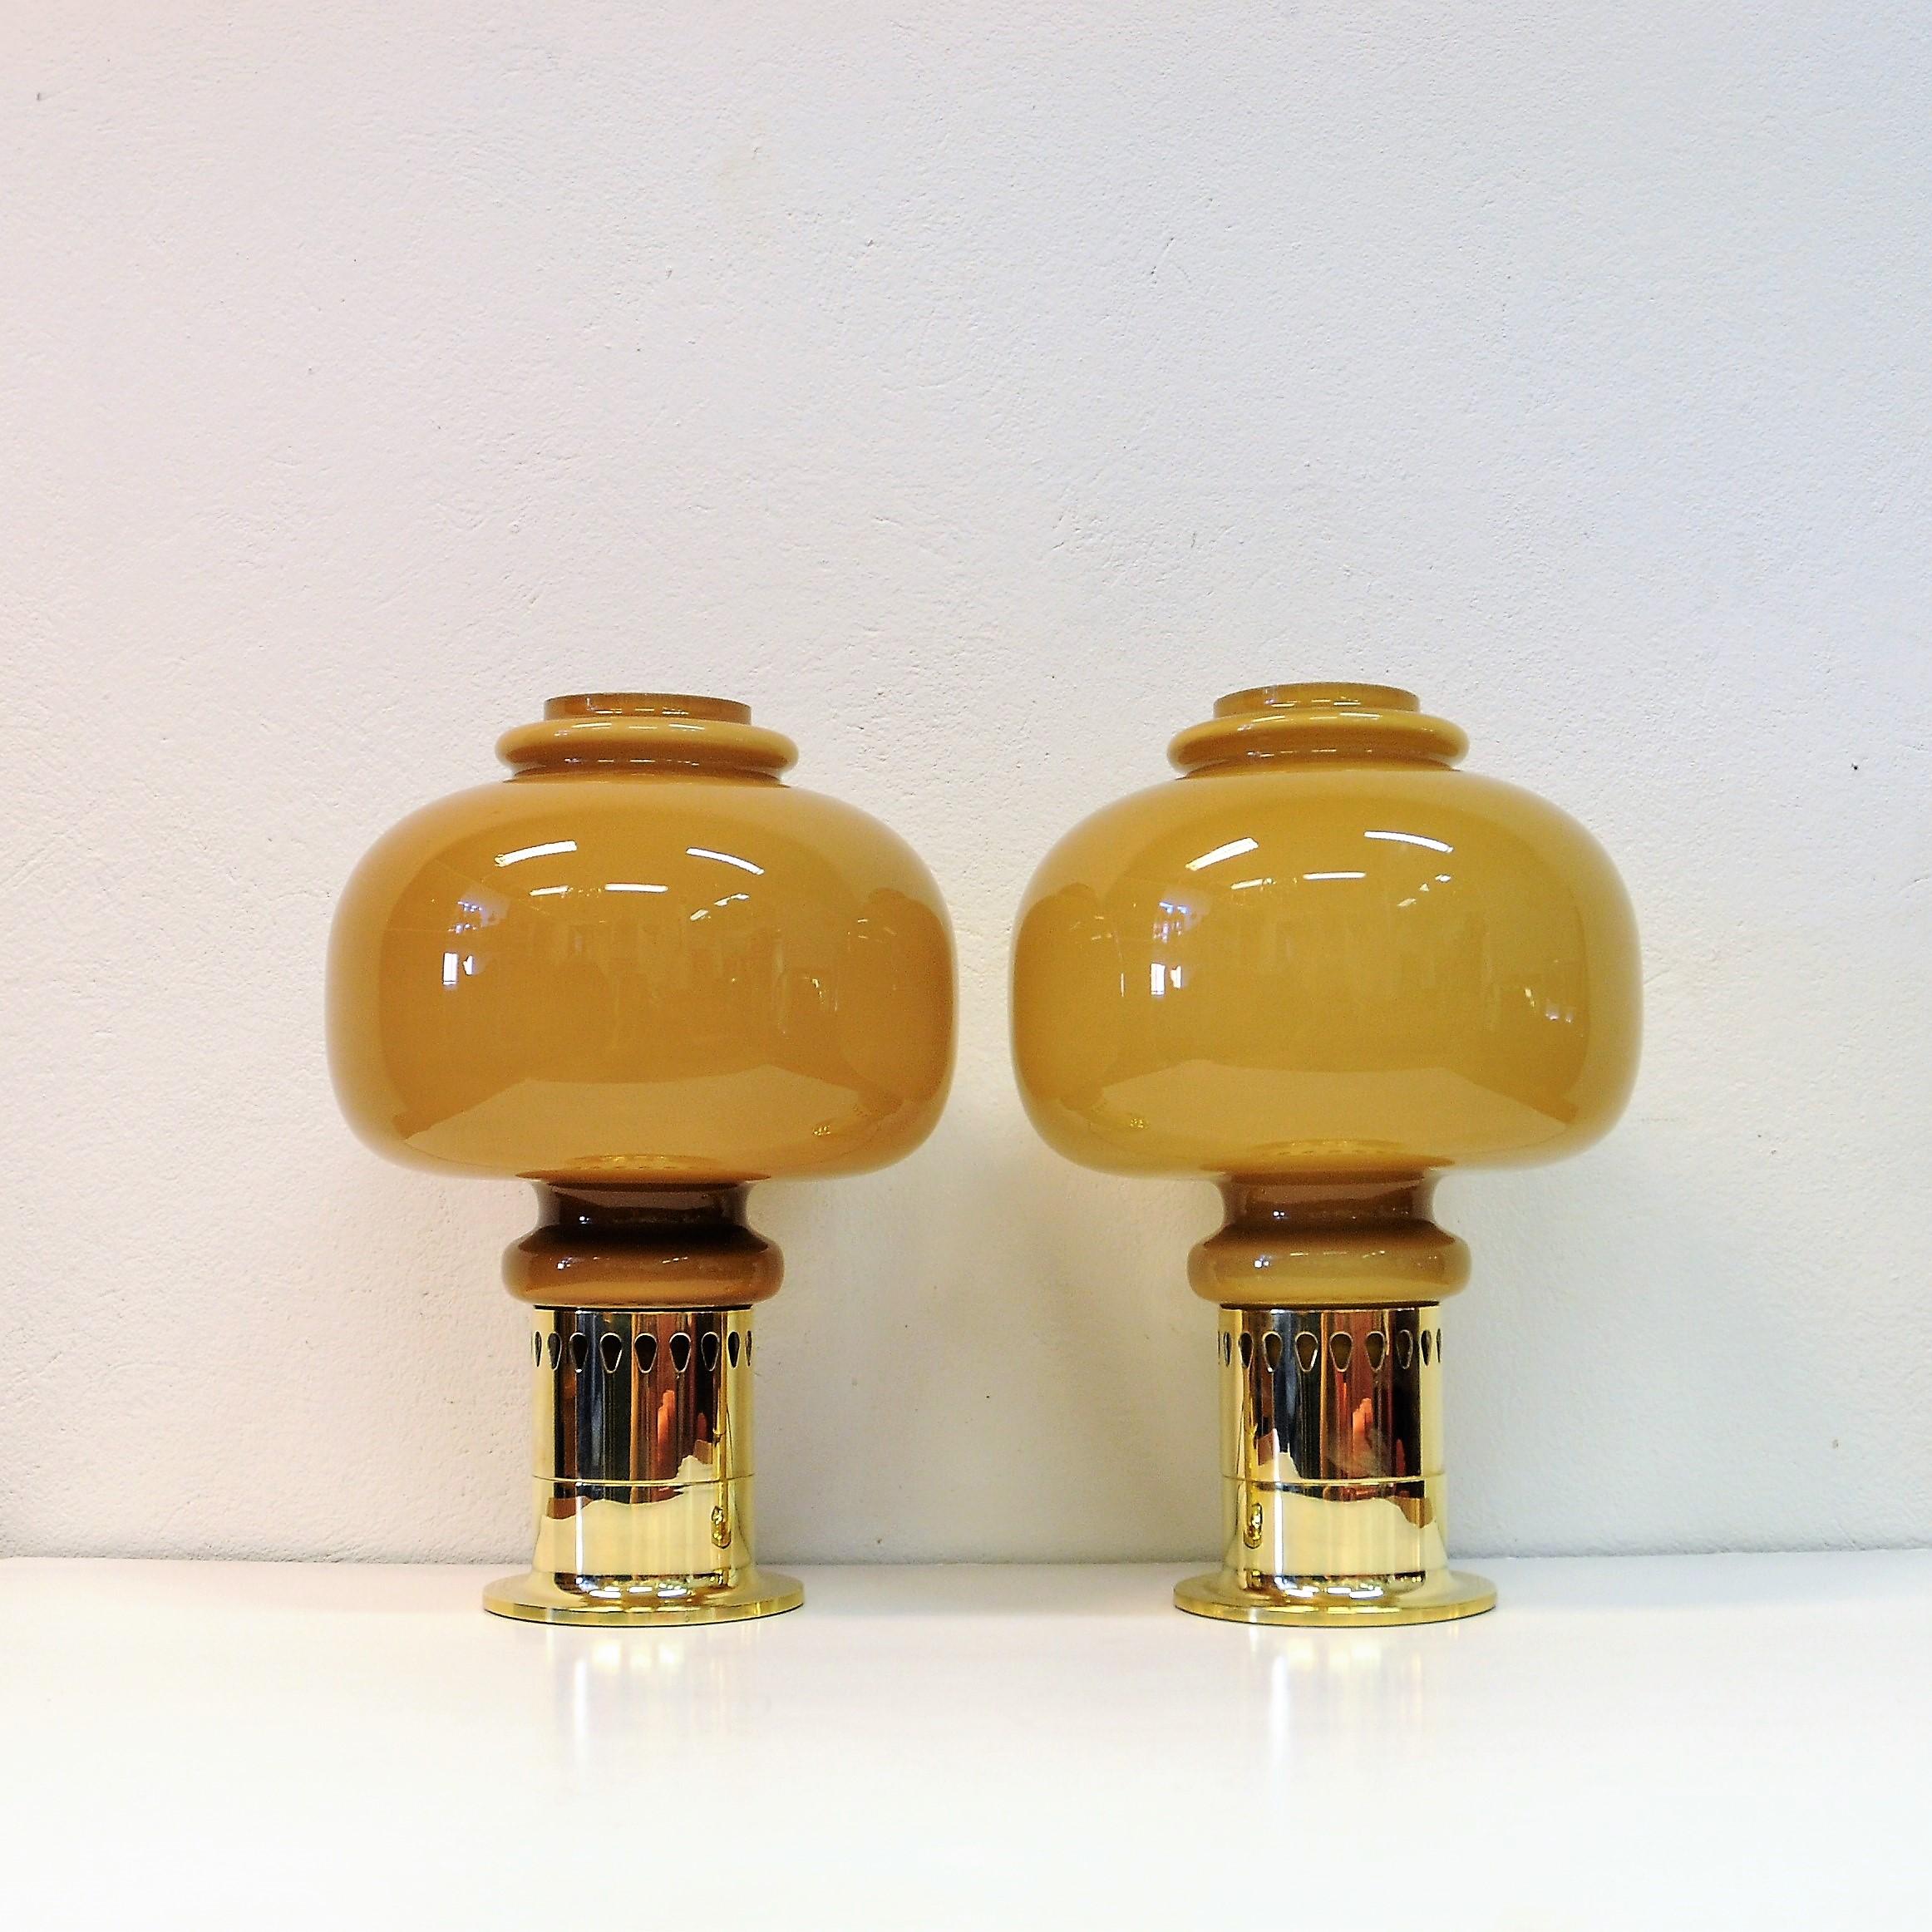 A pair of Swedish glass and brass table Lamps with brown big special shaped lampshades designed by Hans-Agne Jakobsson, Sweden 1960's. H: 39 cm.
Nice lamp bases of brass with decor as a board around. Measures: Total height of lamps about: 39 cm.